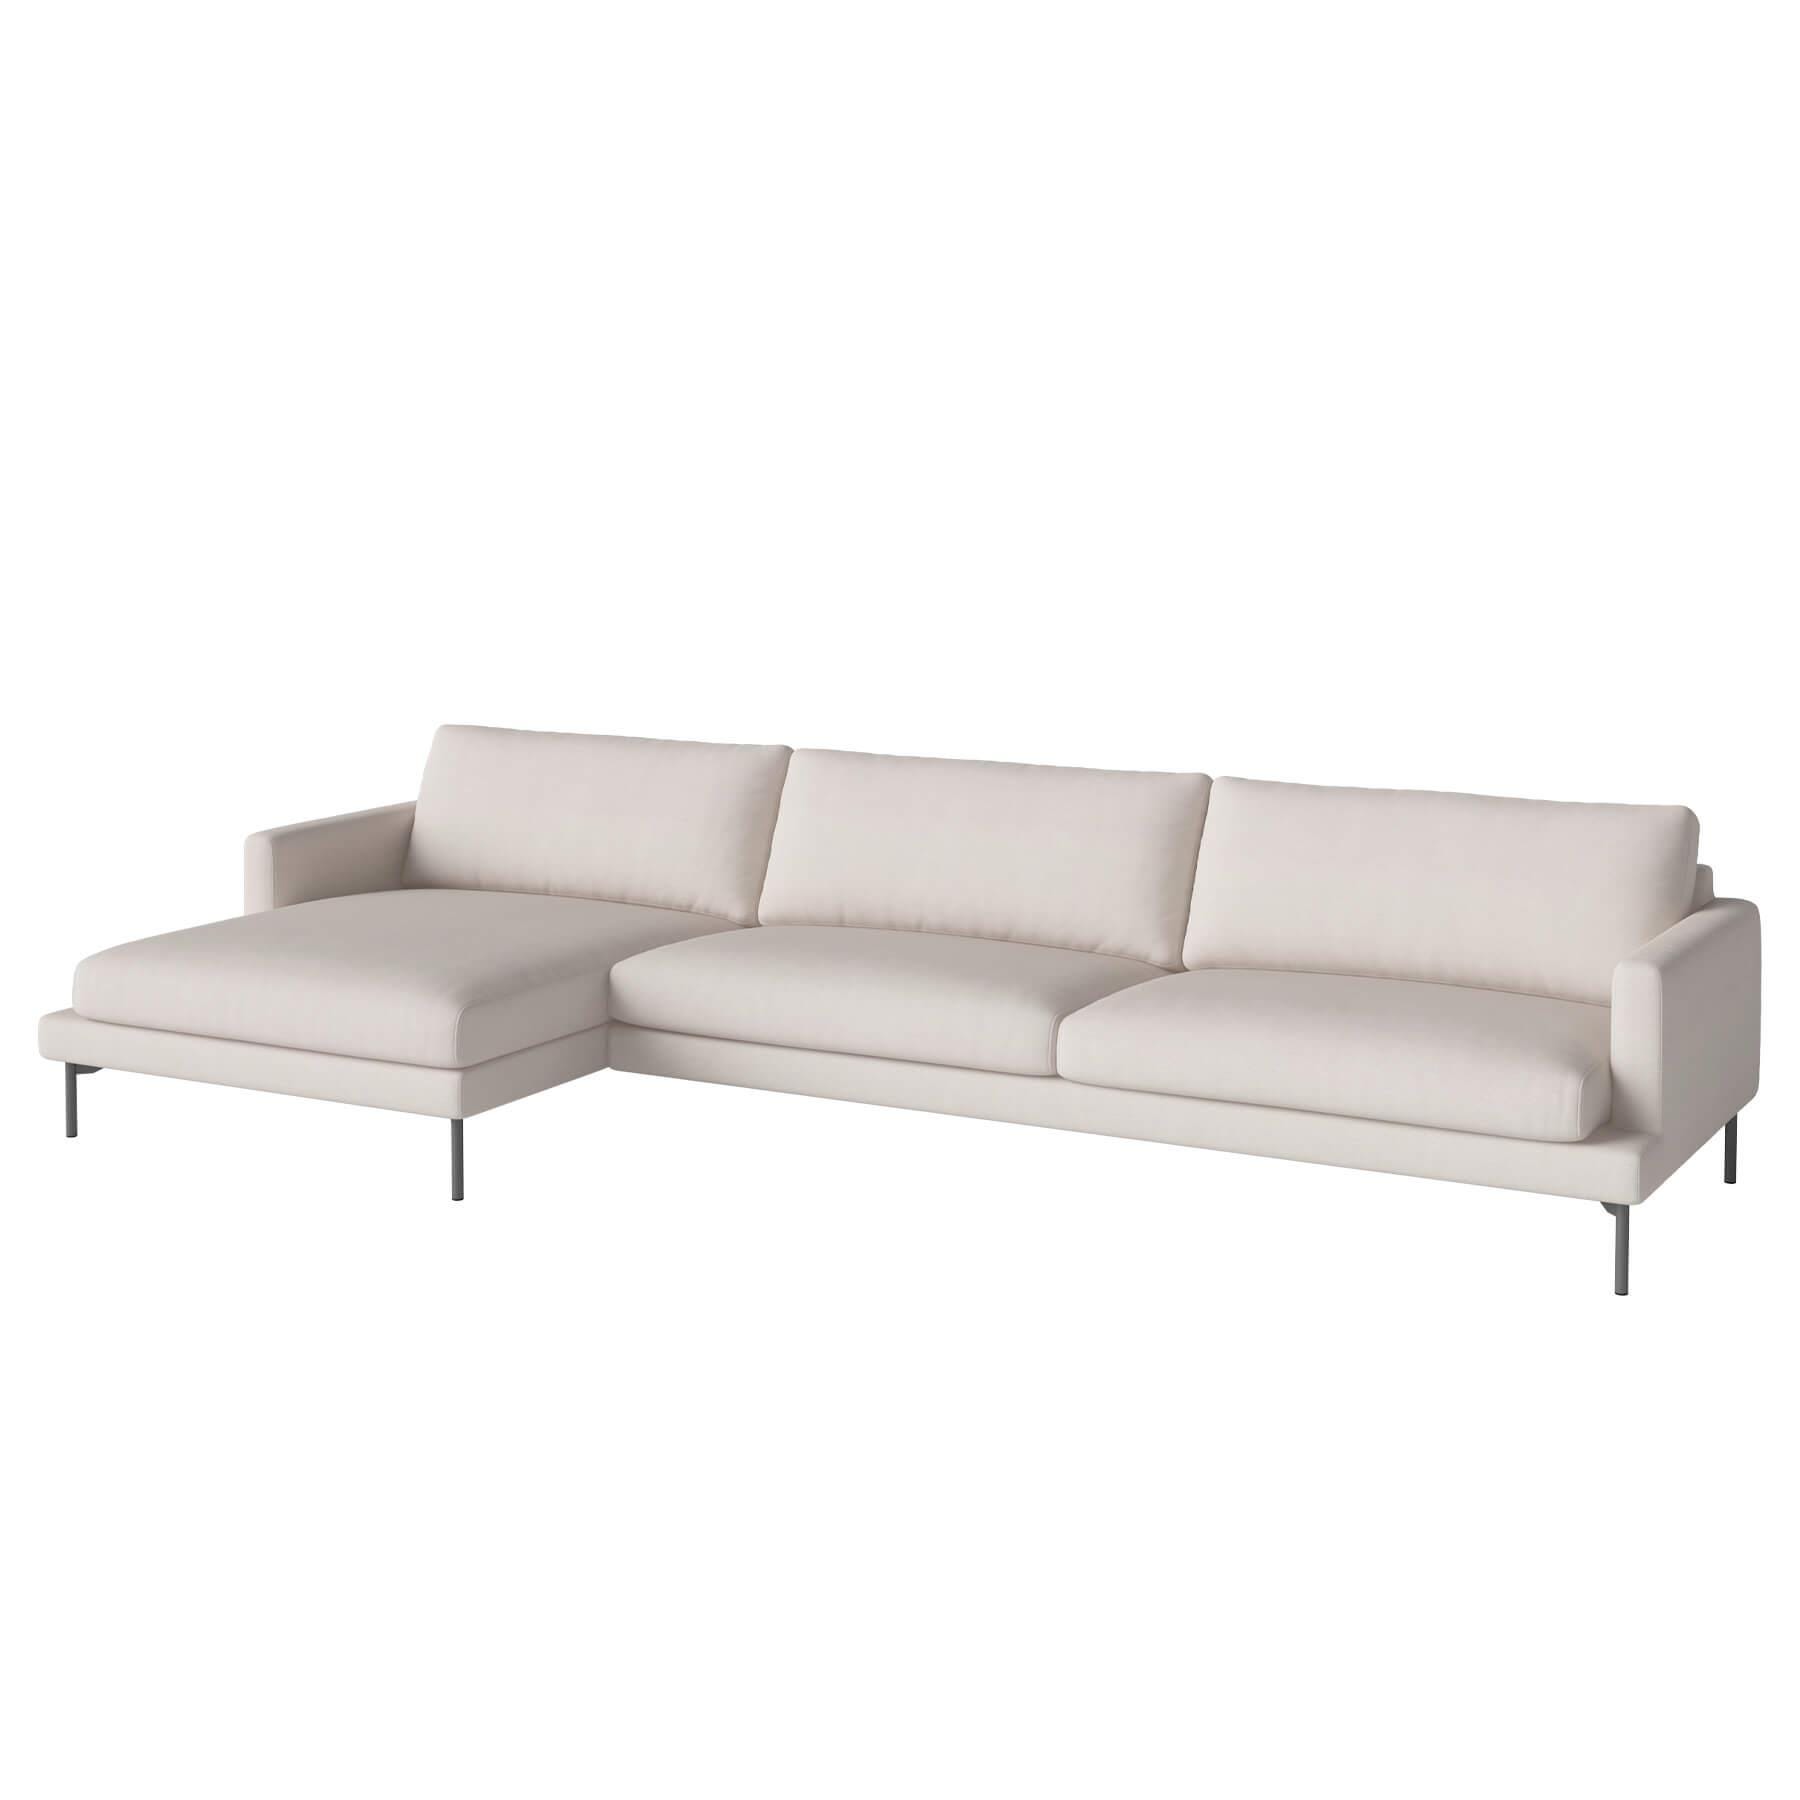 Bolia Veneda Sofa 45 Seater Sofa With Chaise Longue Grey Laquered Steel Linea Beige Left Brown Designer Furniture From Holloways Of Ludlow